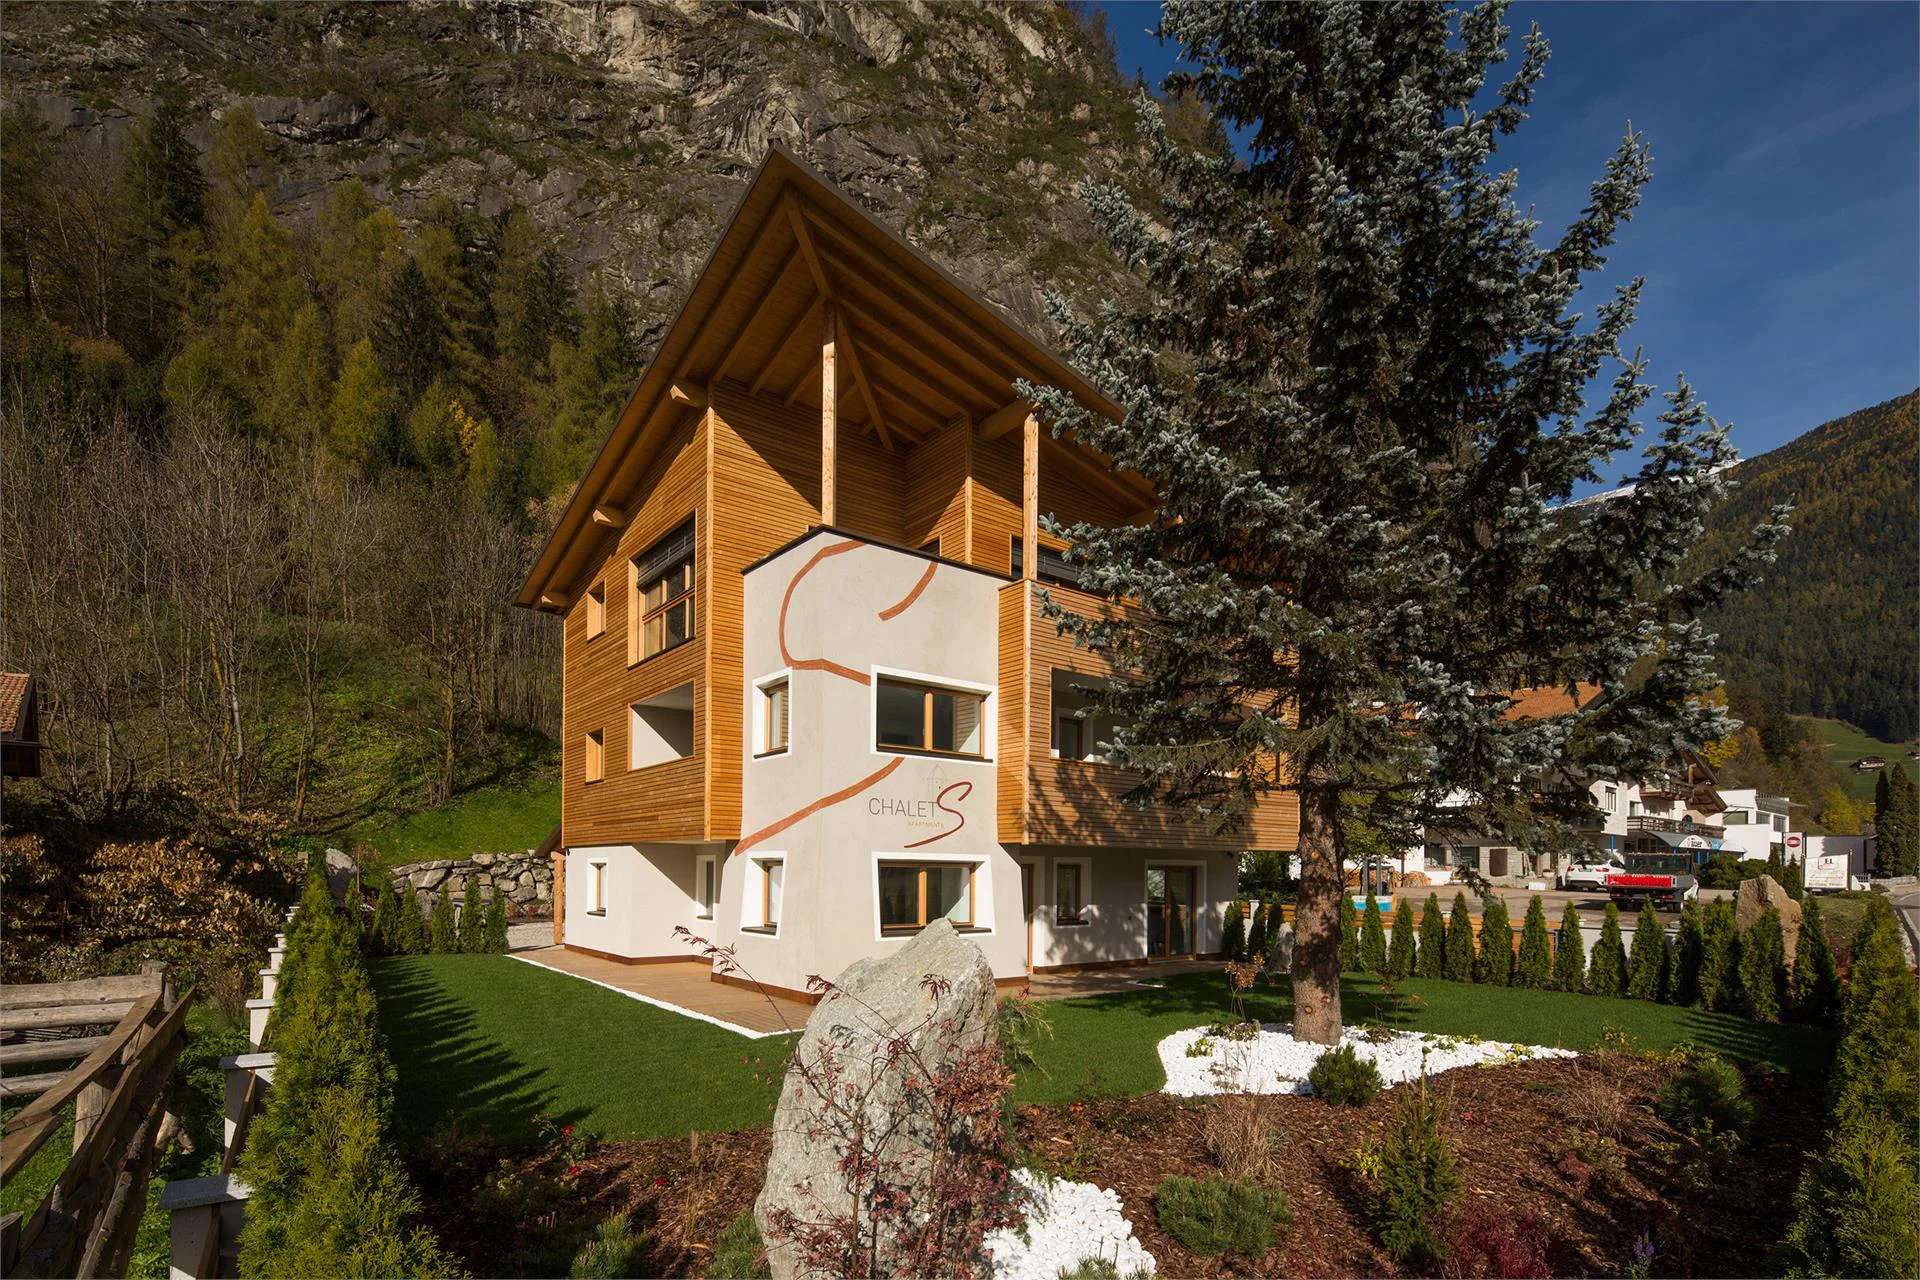 Chalet S Apartments Sand in Taufers/Campo Tures 10 suedtirol.info